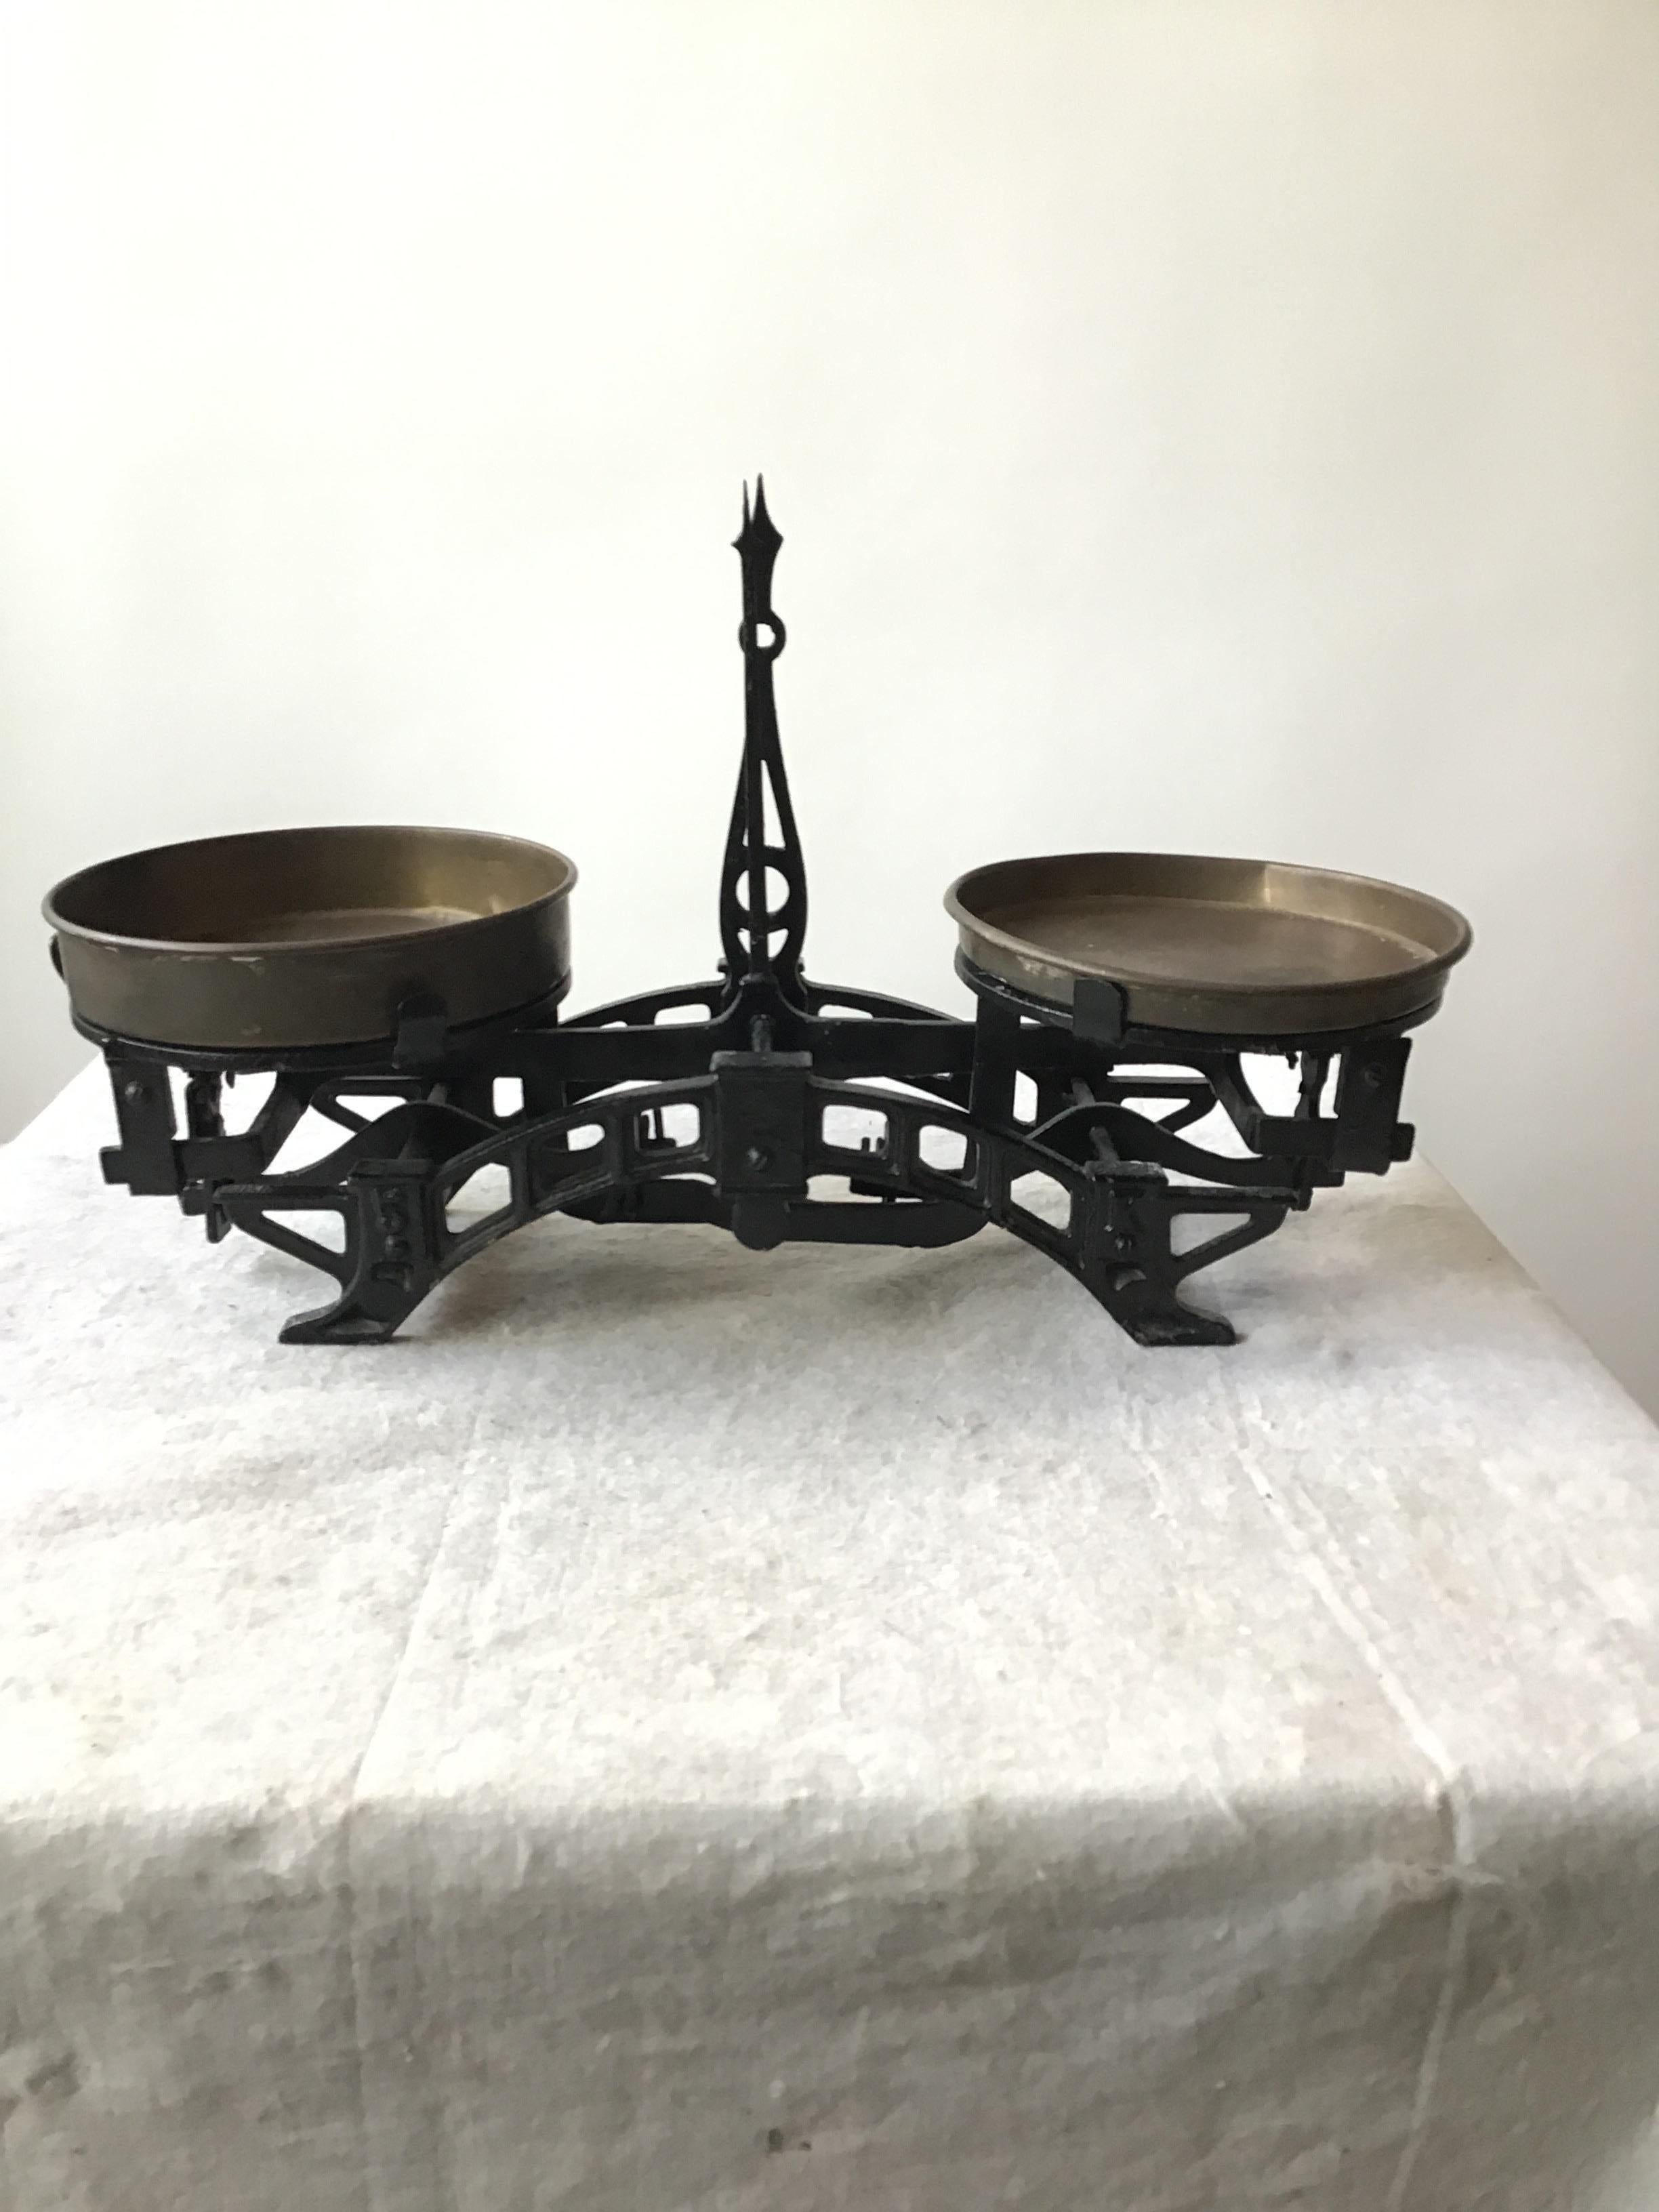 1880s Iron And Brass Balancing Scale In Good Condition For Sale In Tarrytown, NY